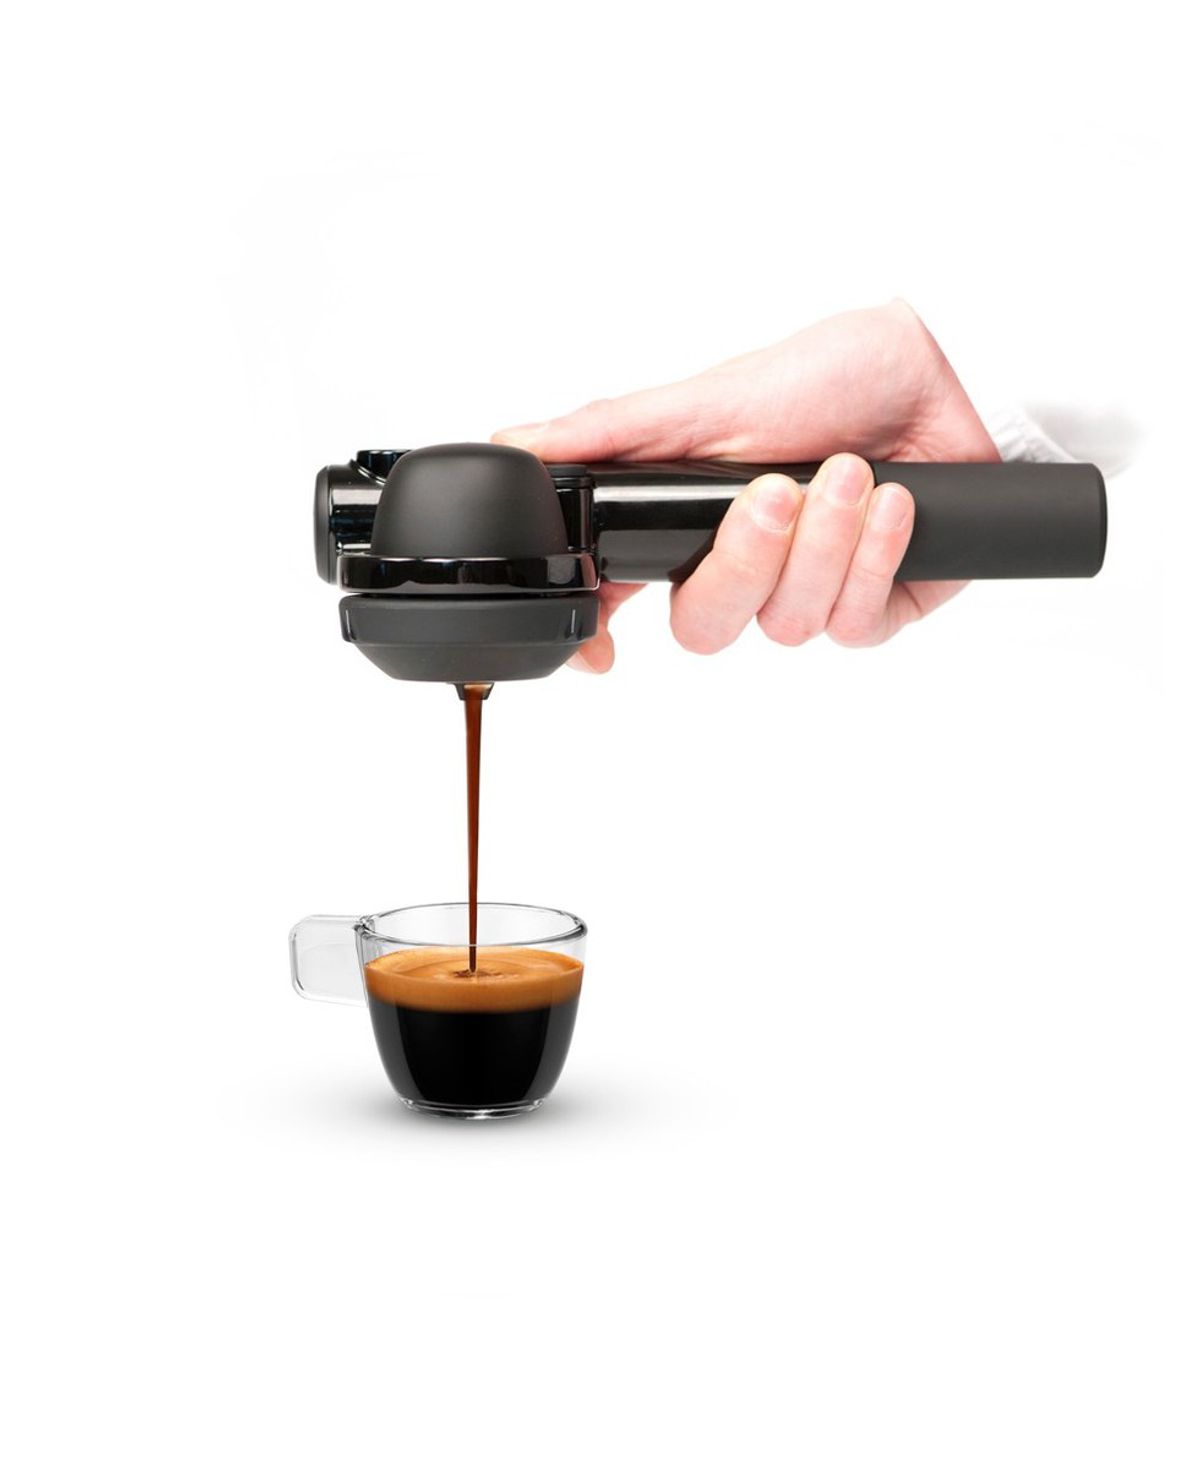 The Handpresso Will Change The United States As We Know It